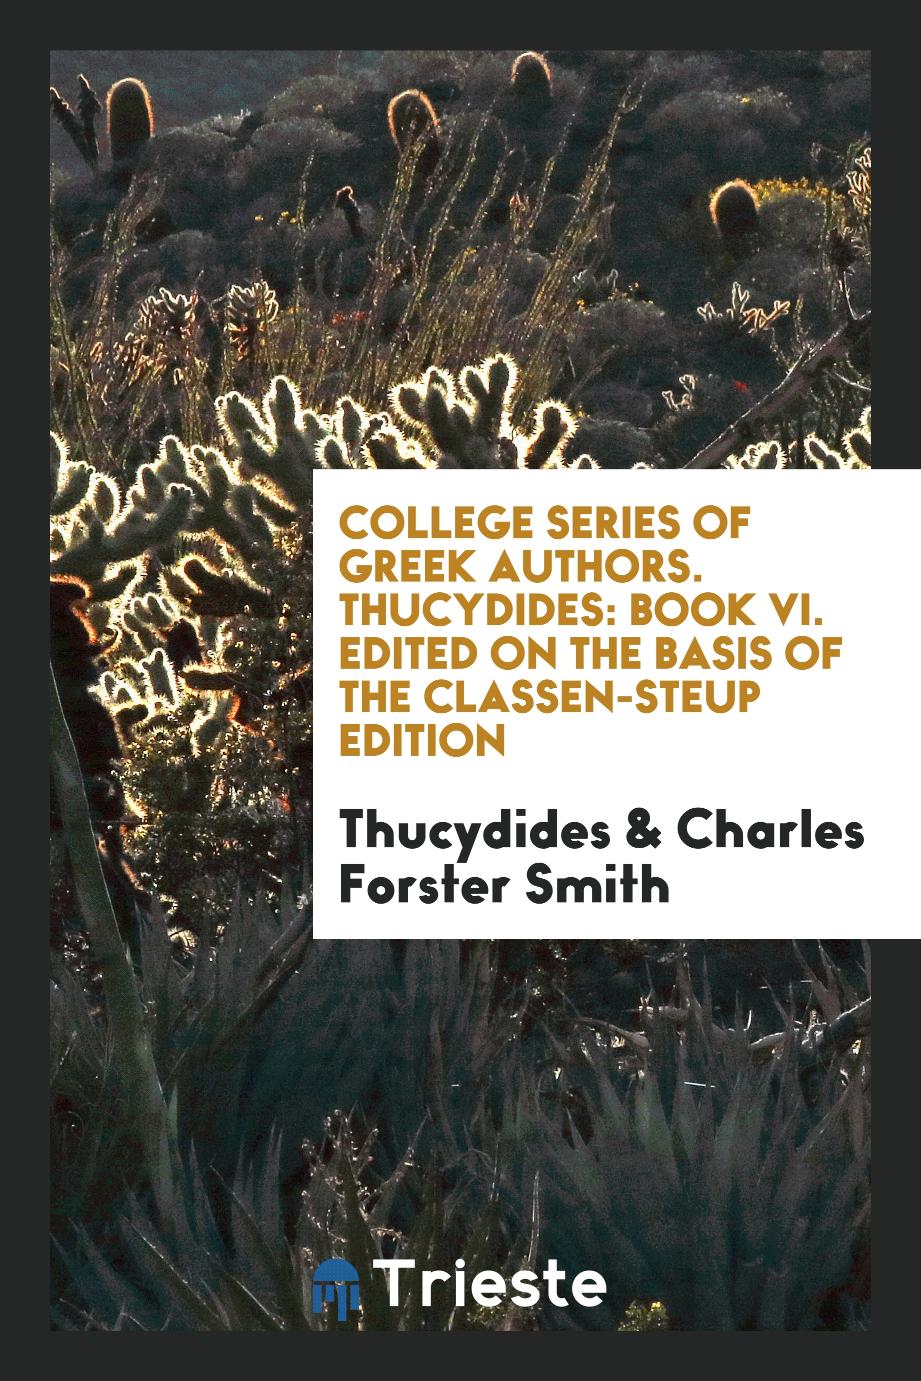 College Series of Greek Authors. Thucydides: Book VI. Edited on the Basis of the Classen-Steup Edition